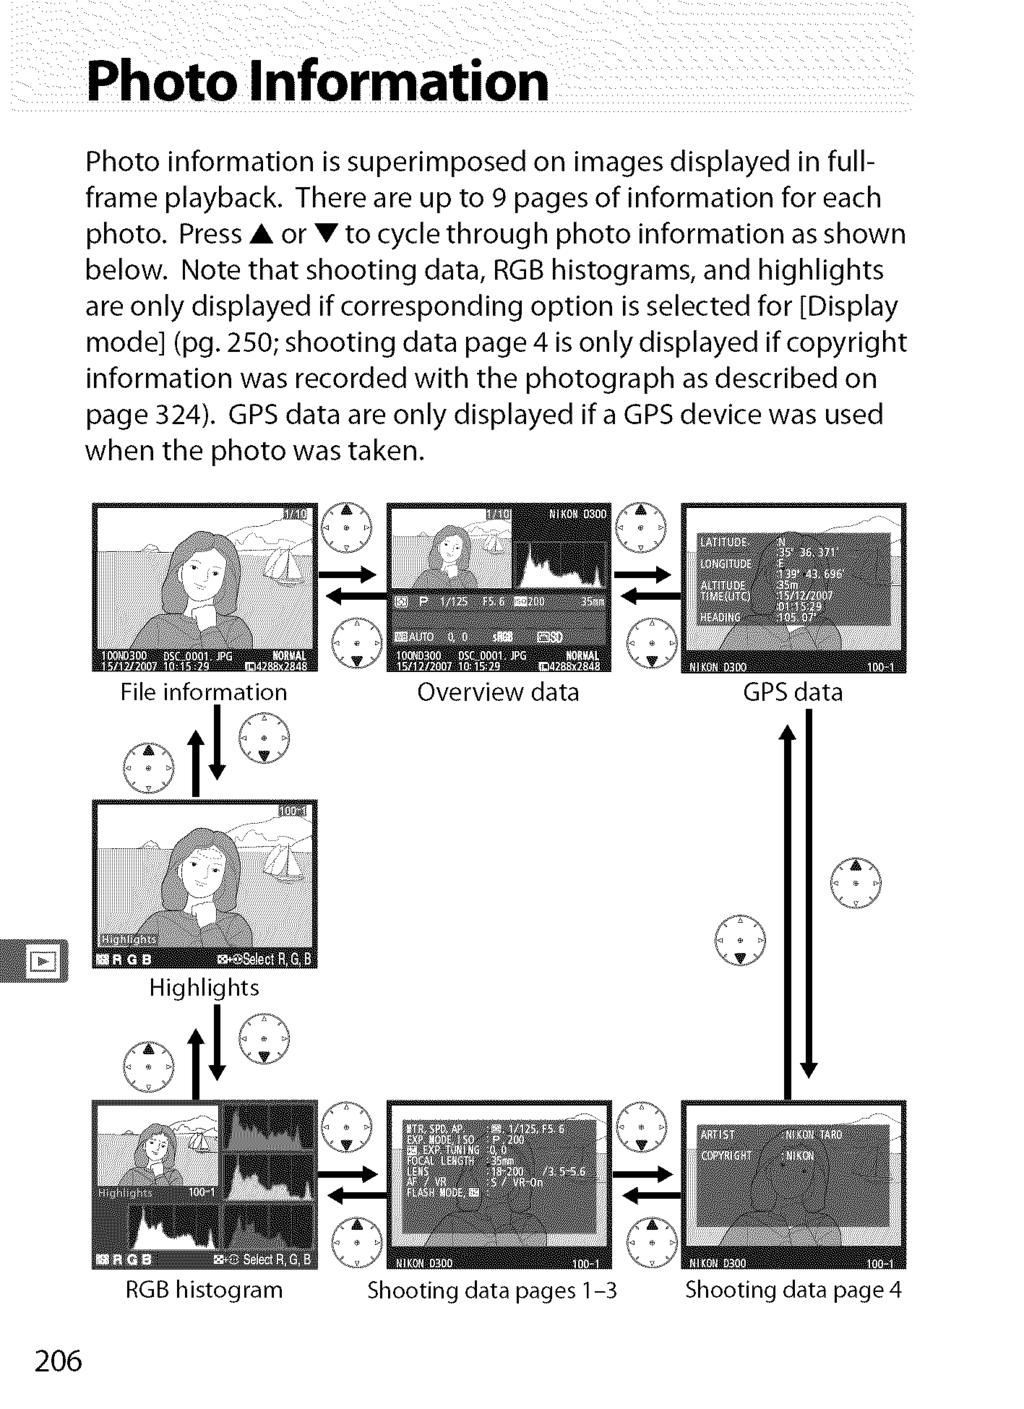 Photo information is superimposed on images displayed in fullframe playback. There are up to 9 pages of information for each photo. Press or to cycle through photo information as shown below.